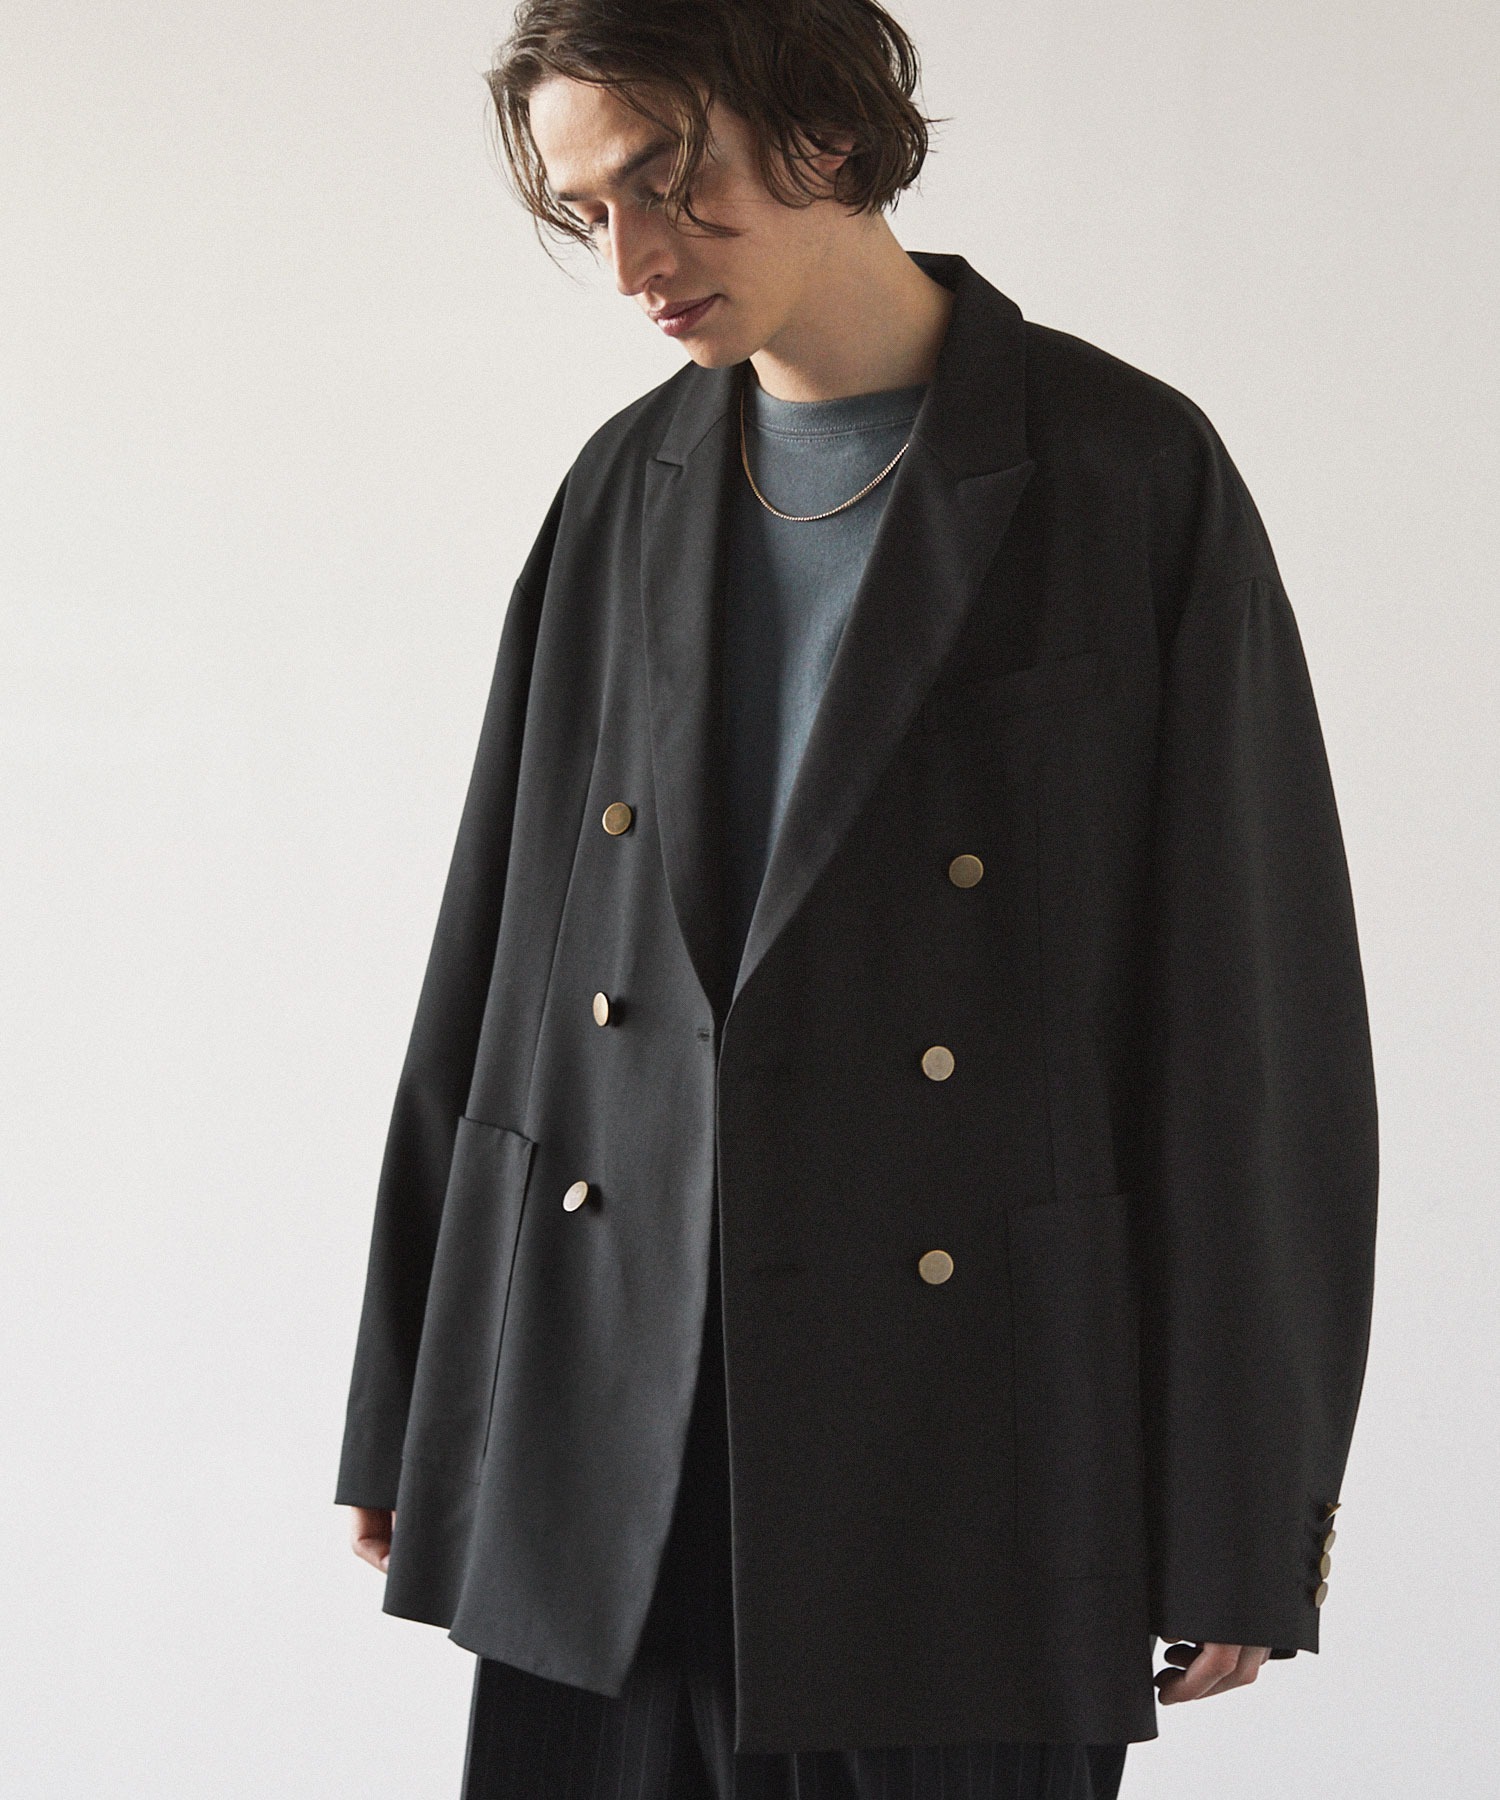 【kicuri】 Gold button over jacket